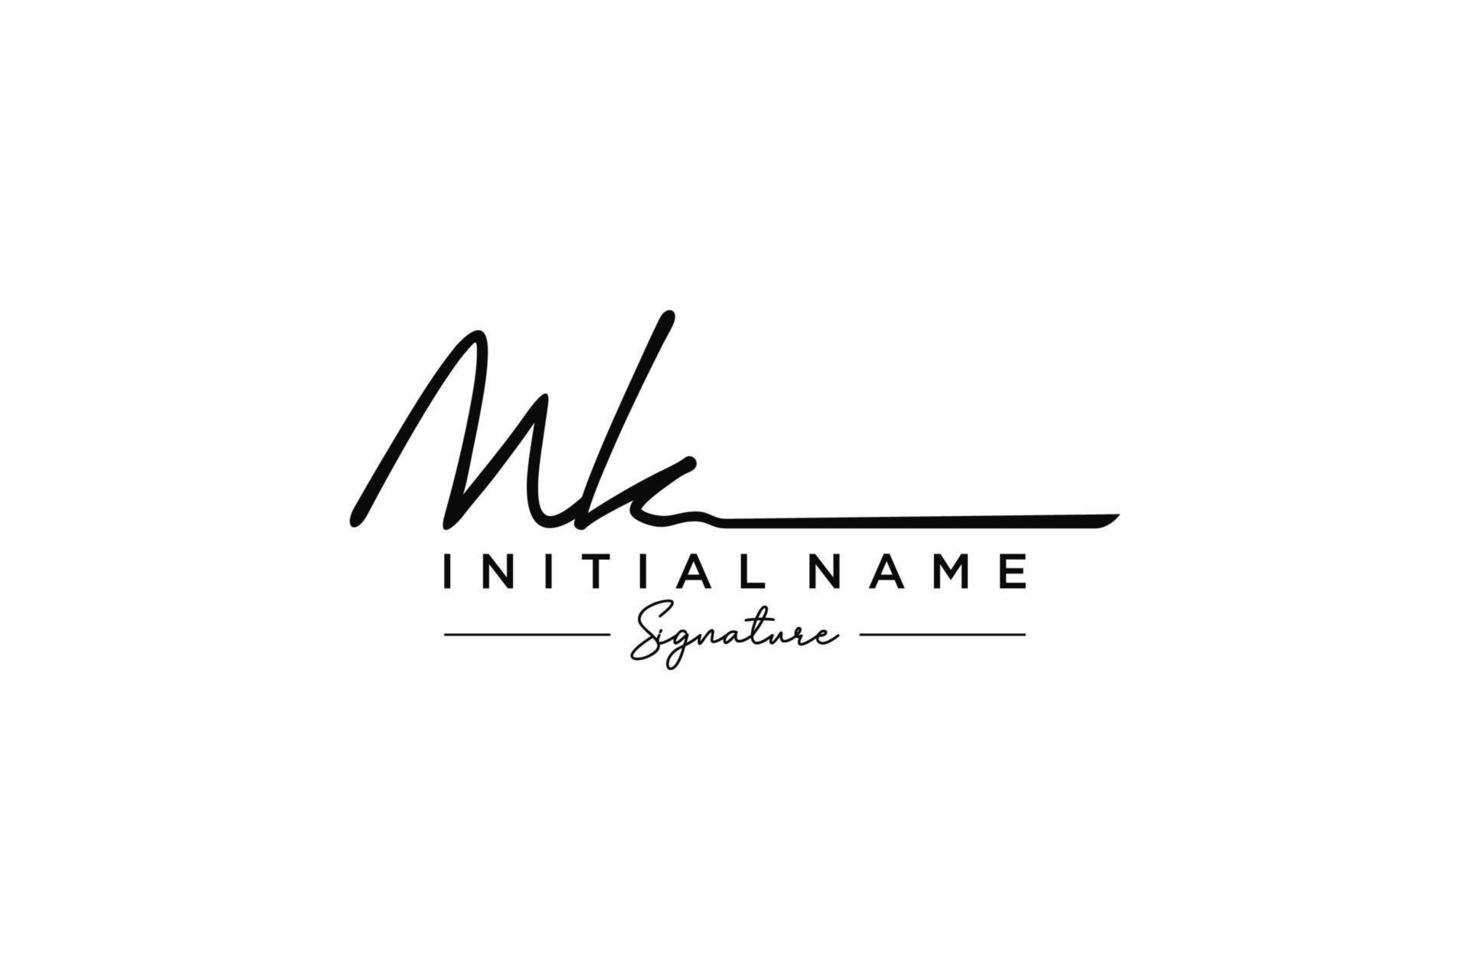 Initial MK signature logo template vector. Hand drawn Calligraphy lettering Vector illustration.